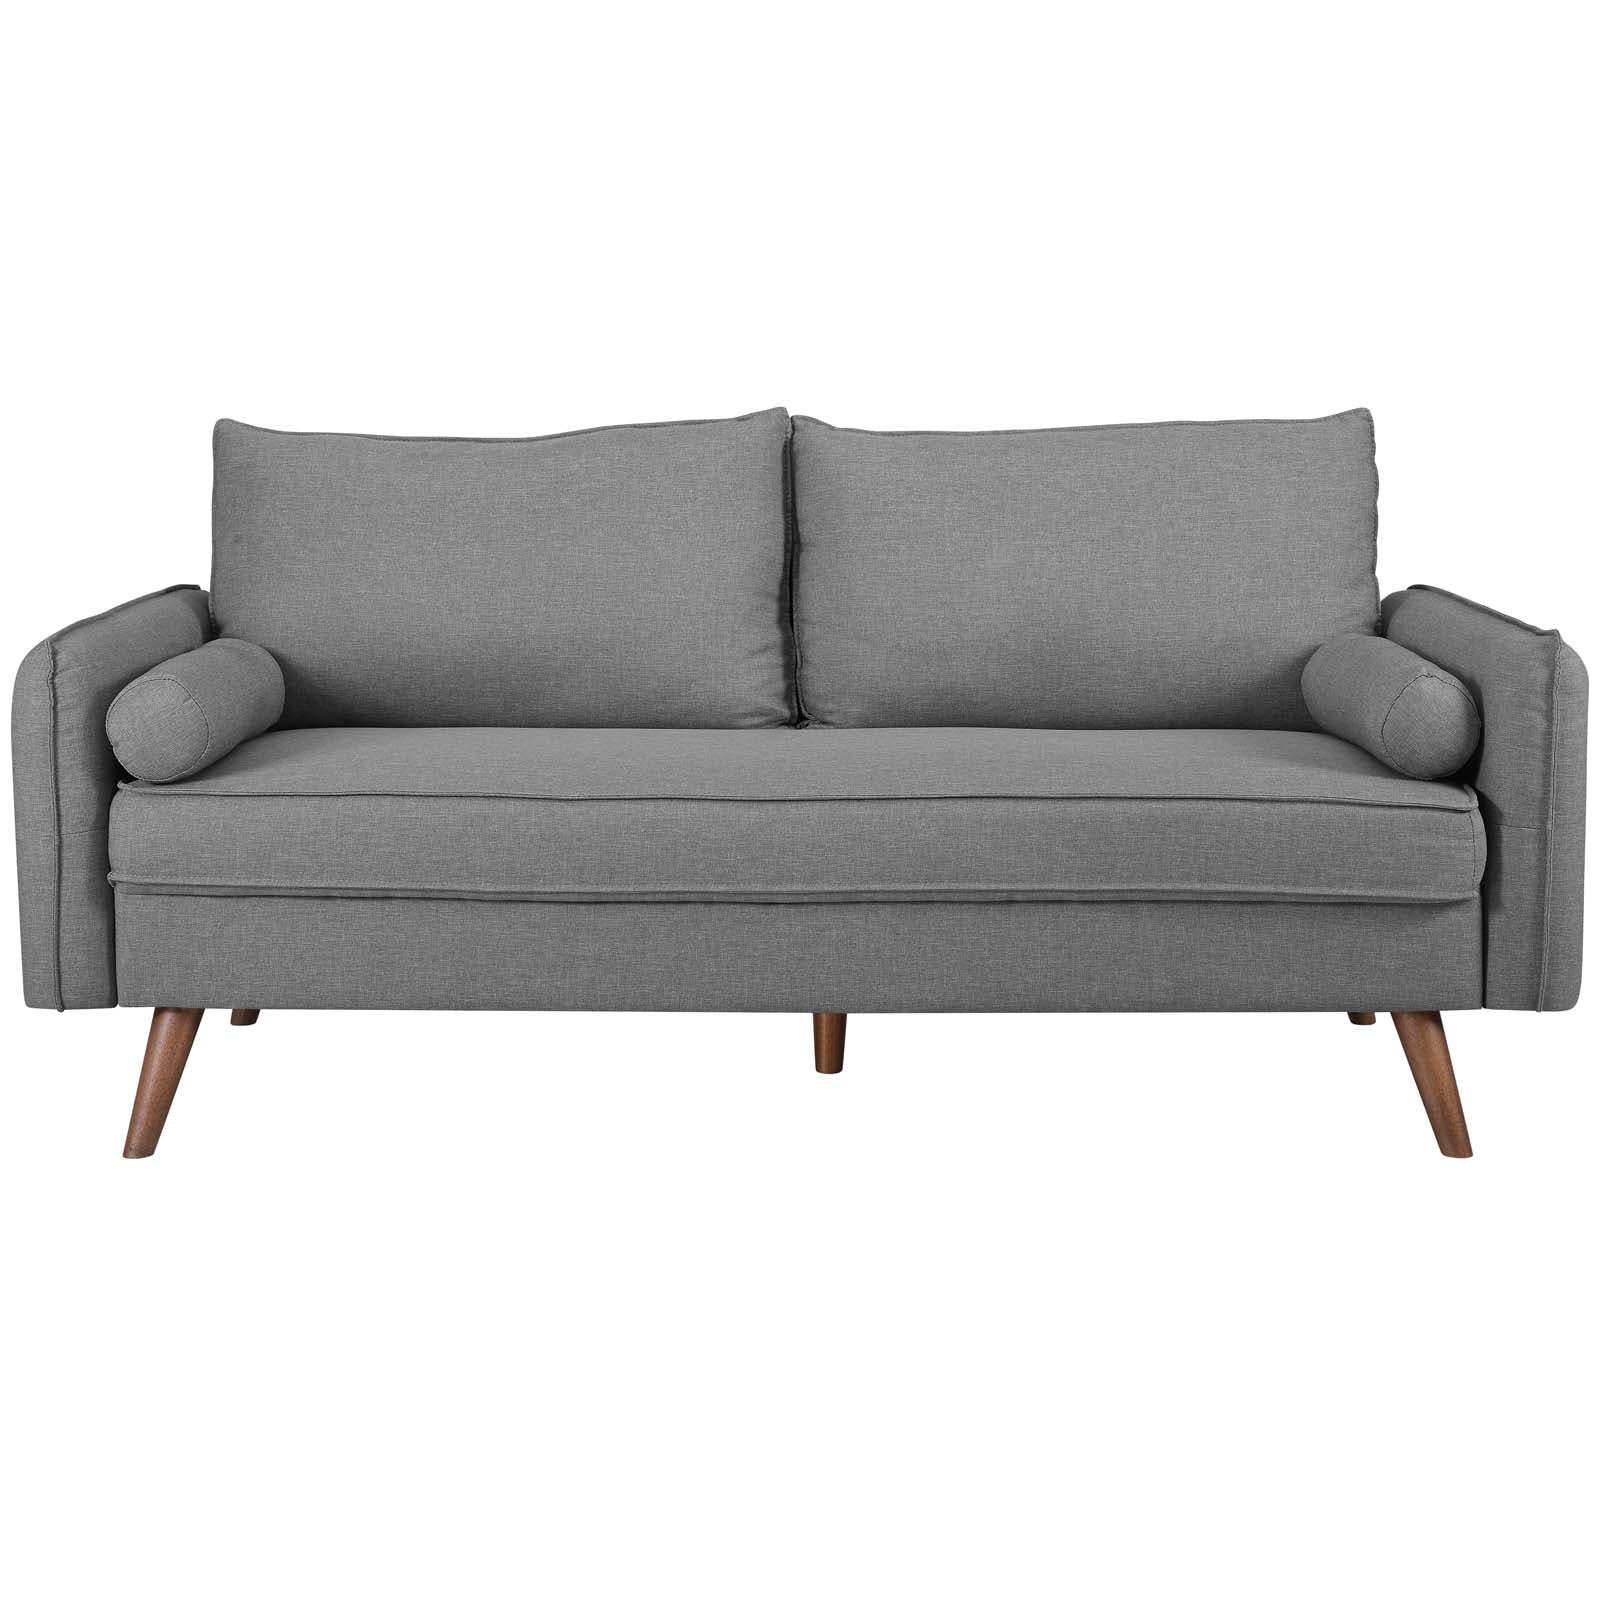 Modway Sofas & Couches - Revive Upholstered Fabric Sofa Light Gray